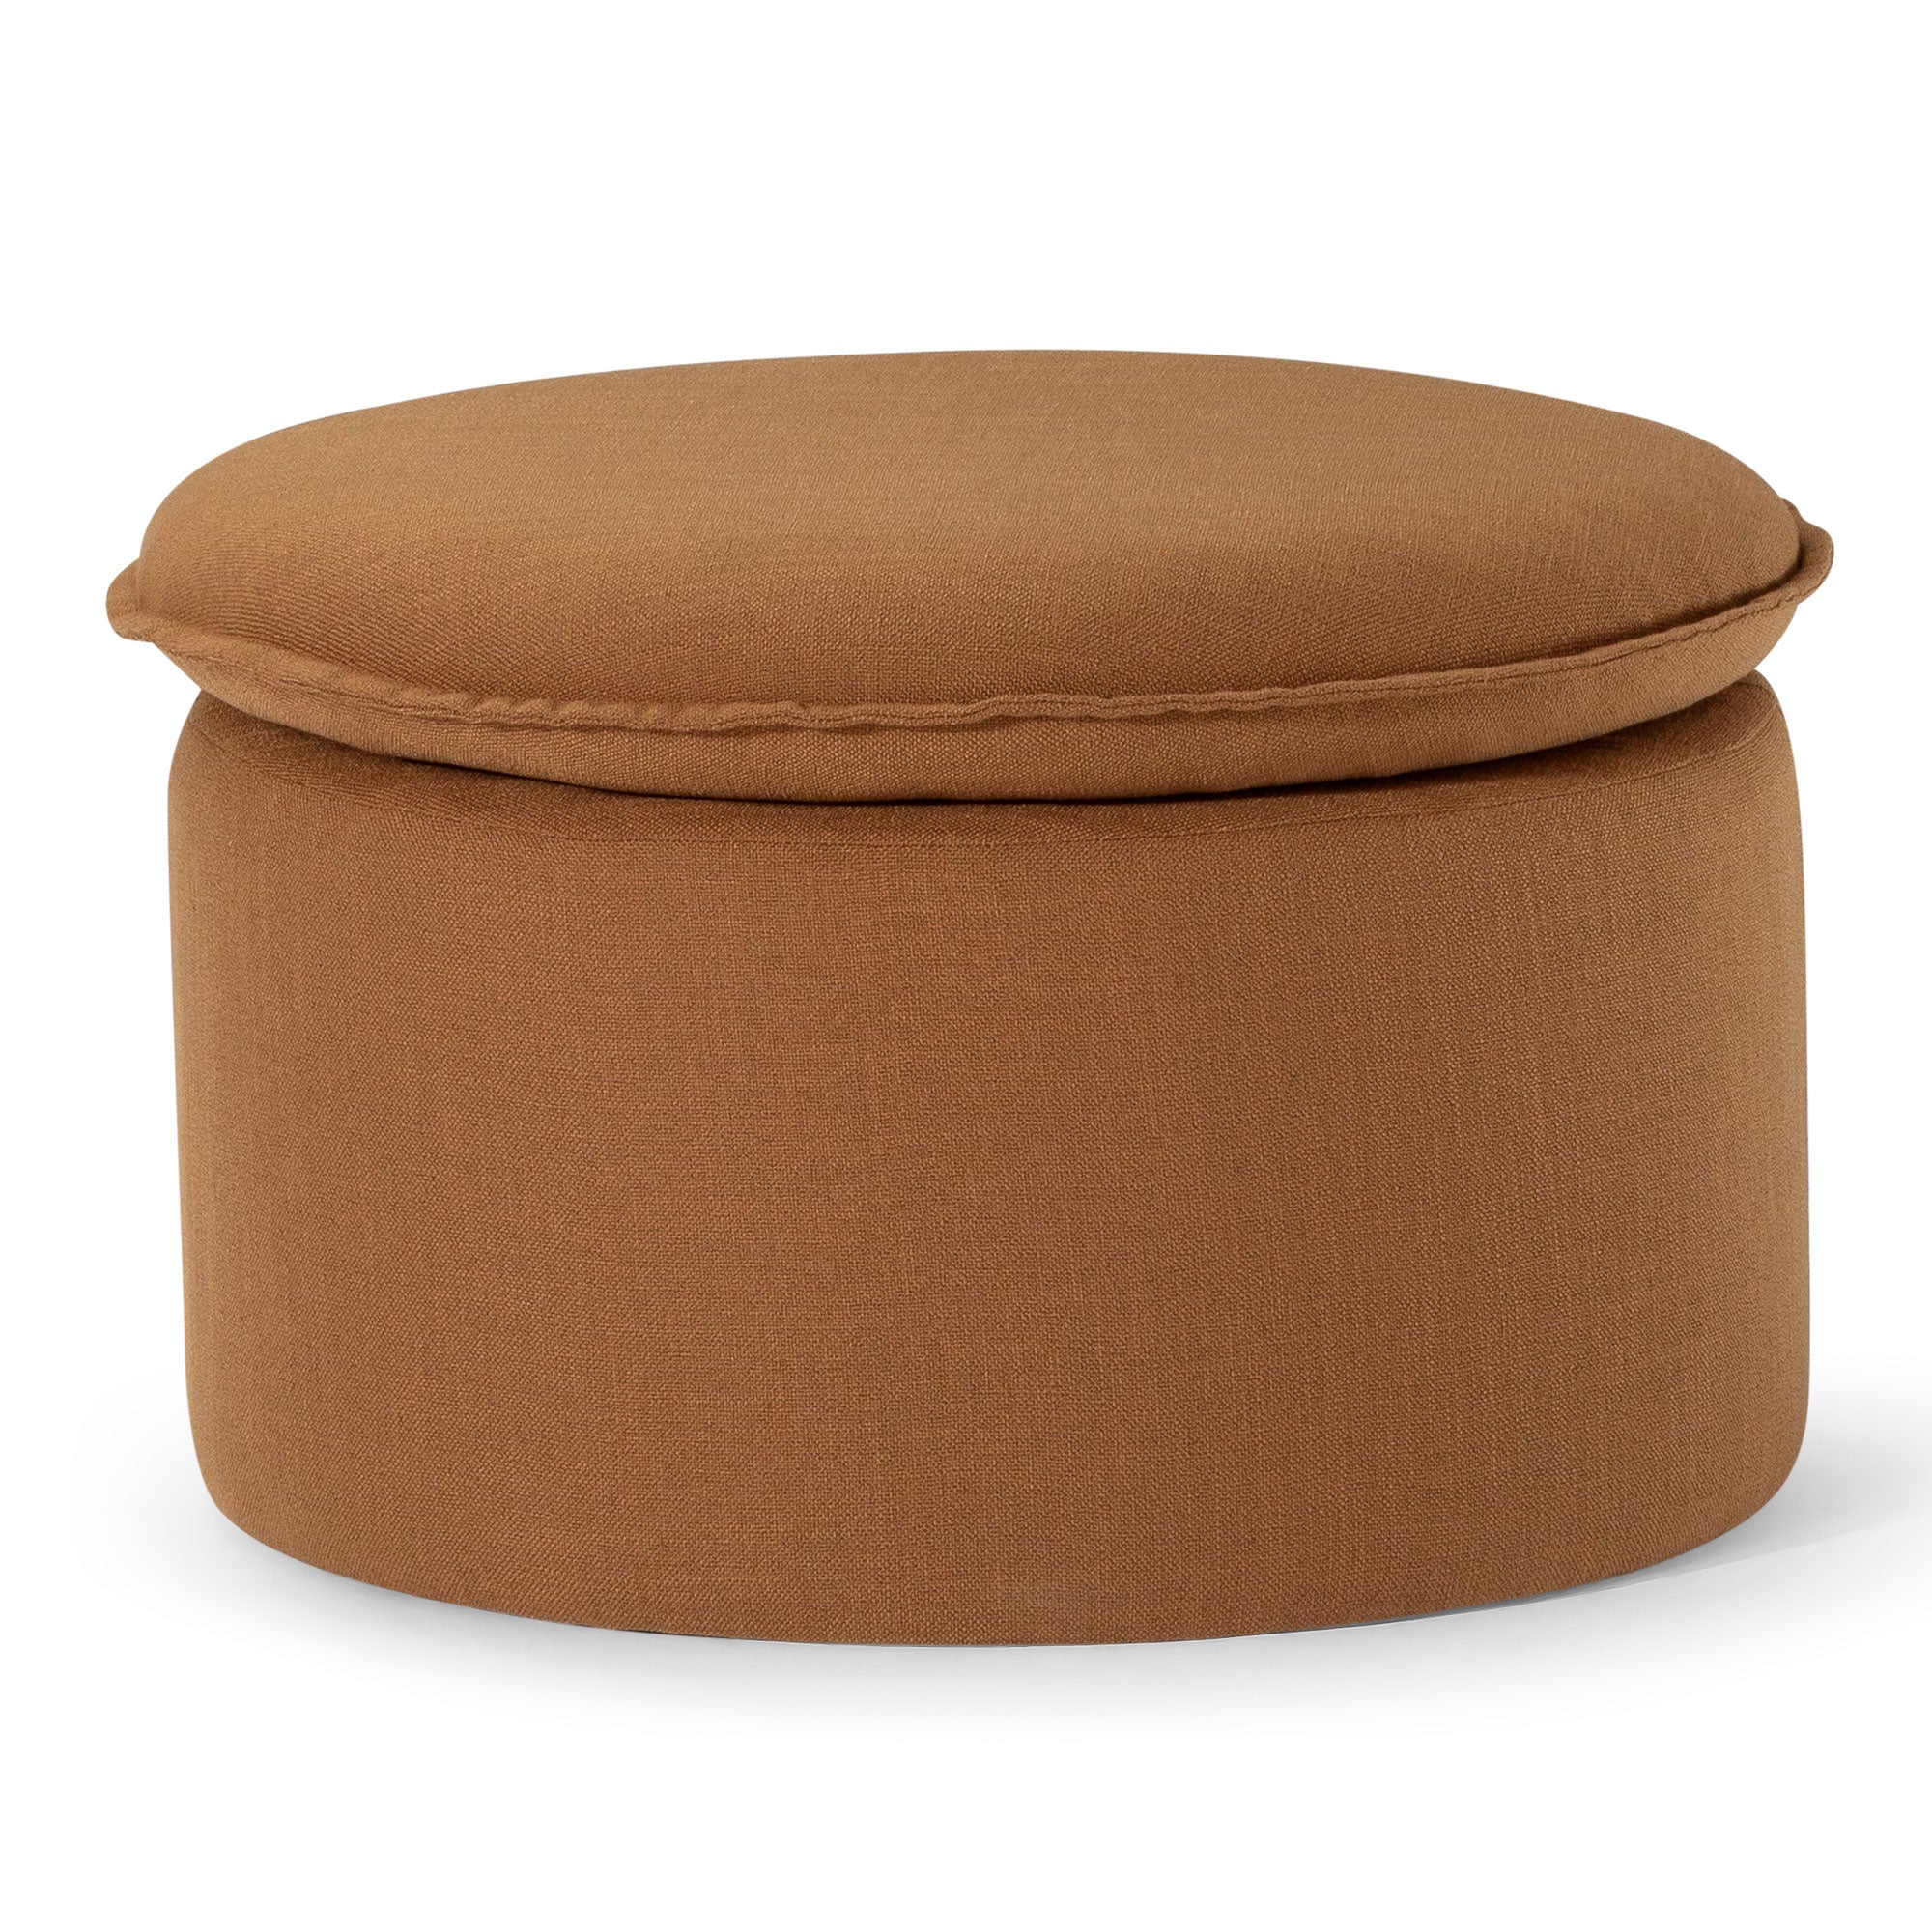 Maven-Lane-Lyra-Contemporary-Ottoman-in-Clay-Fabric-Upholstery-Ottomans-&-Poufs